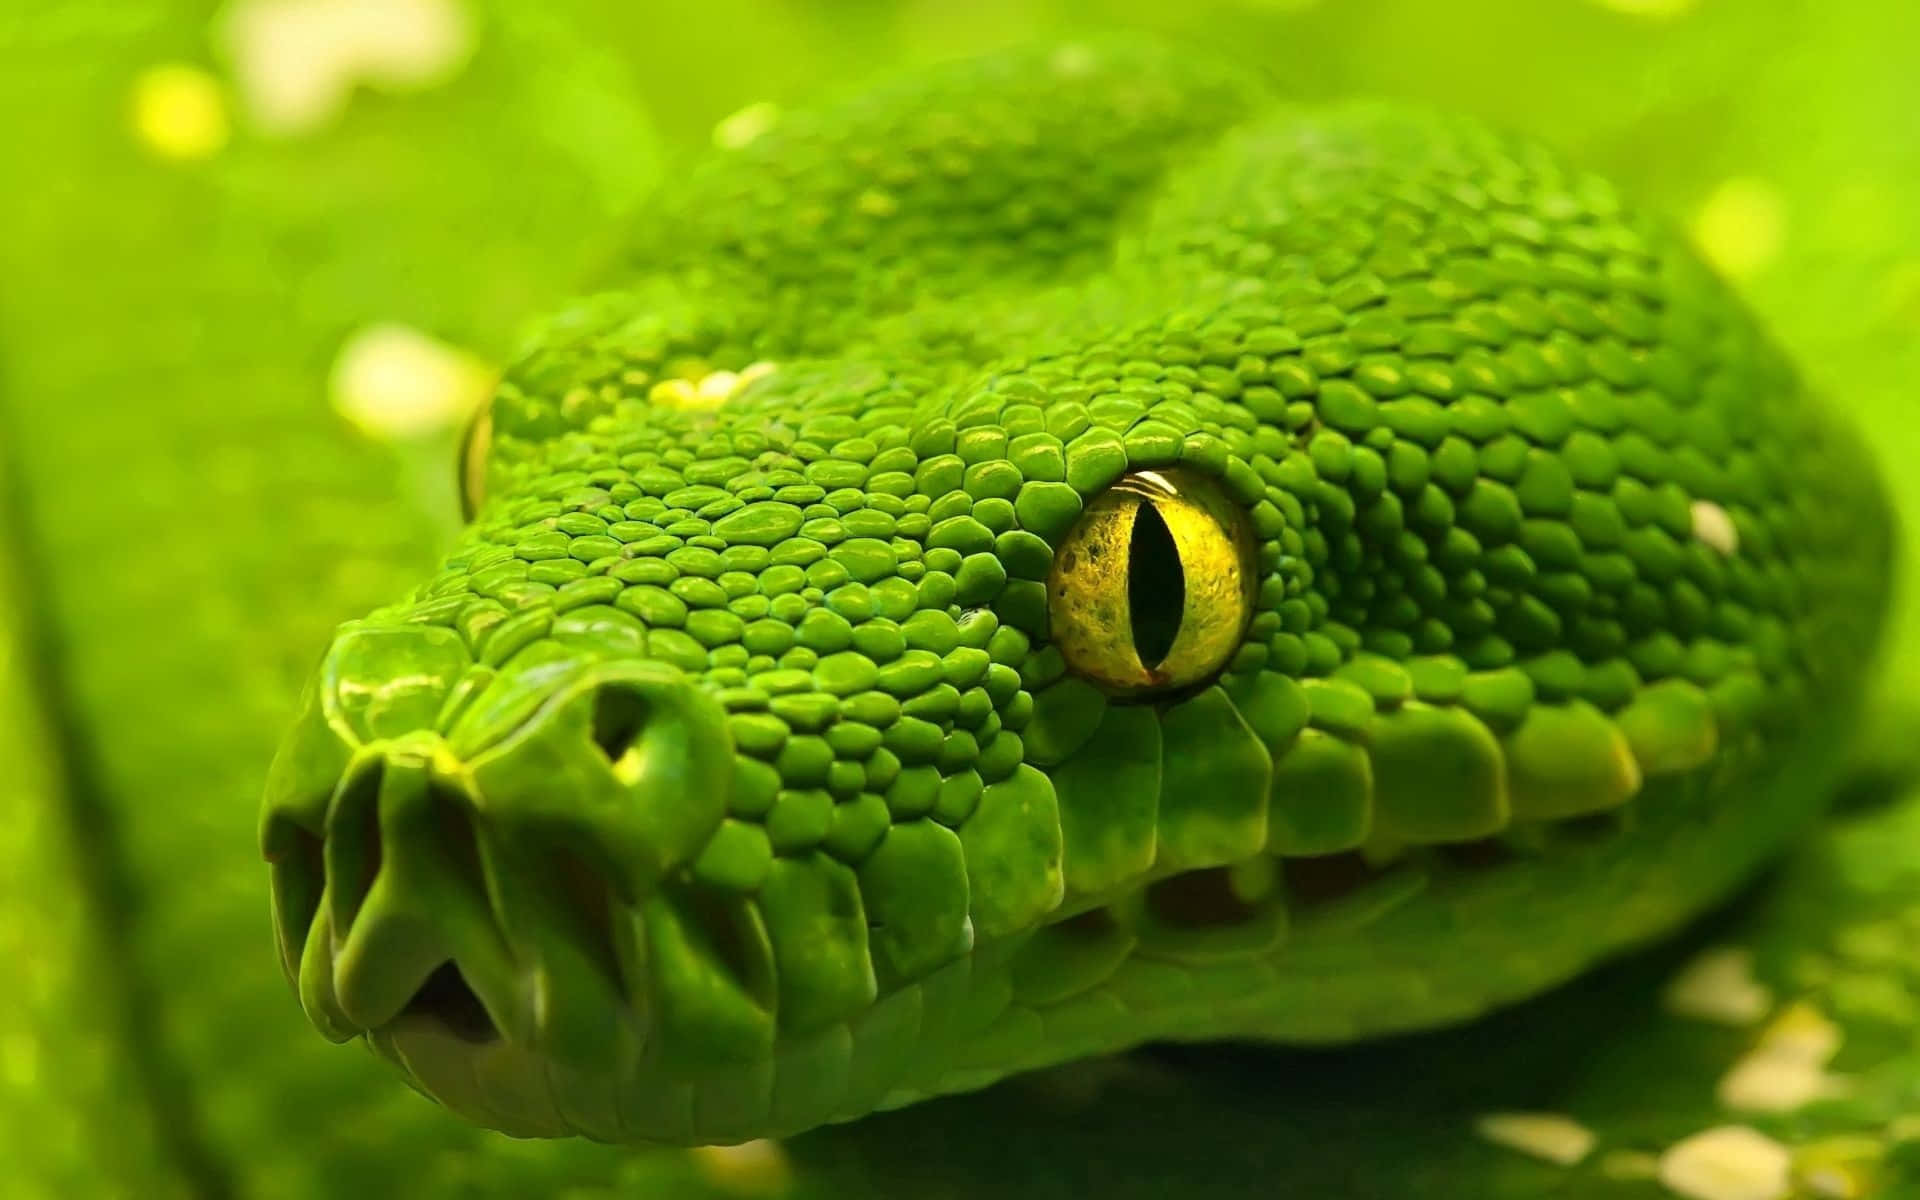 A large green snake slithers through the grass